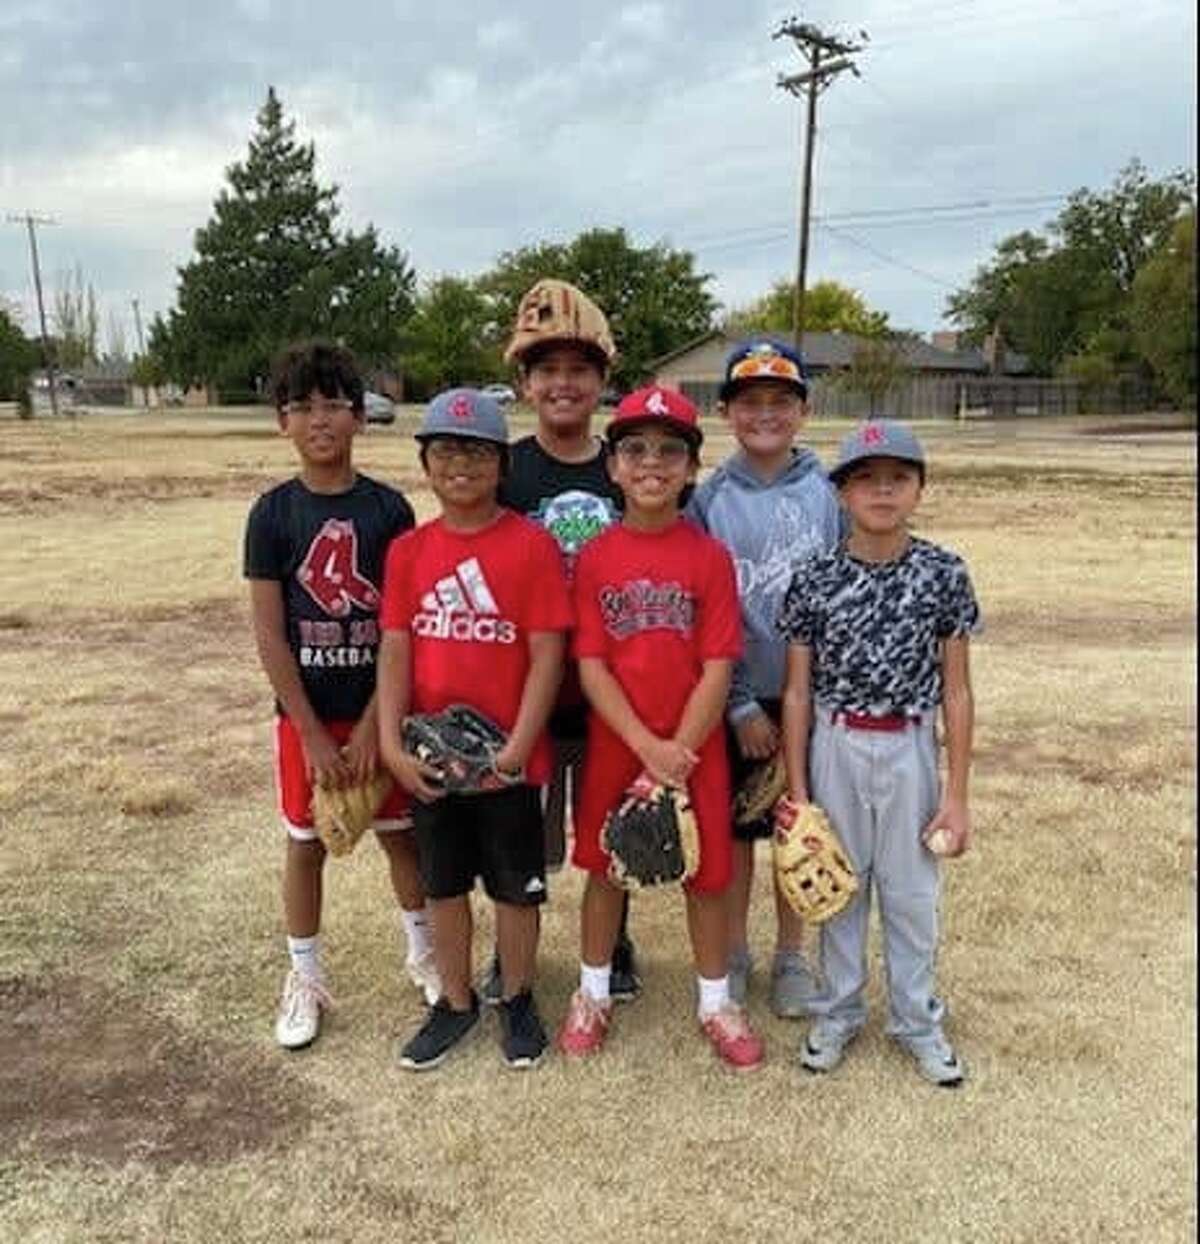 Young Plainview baseball players extinguish fire at local park